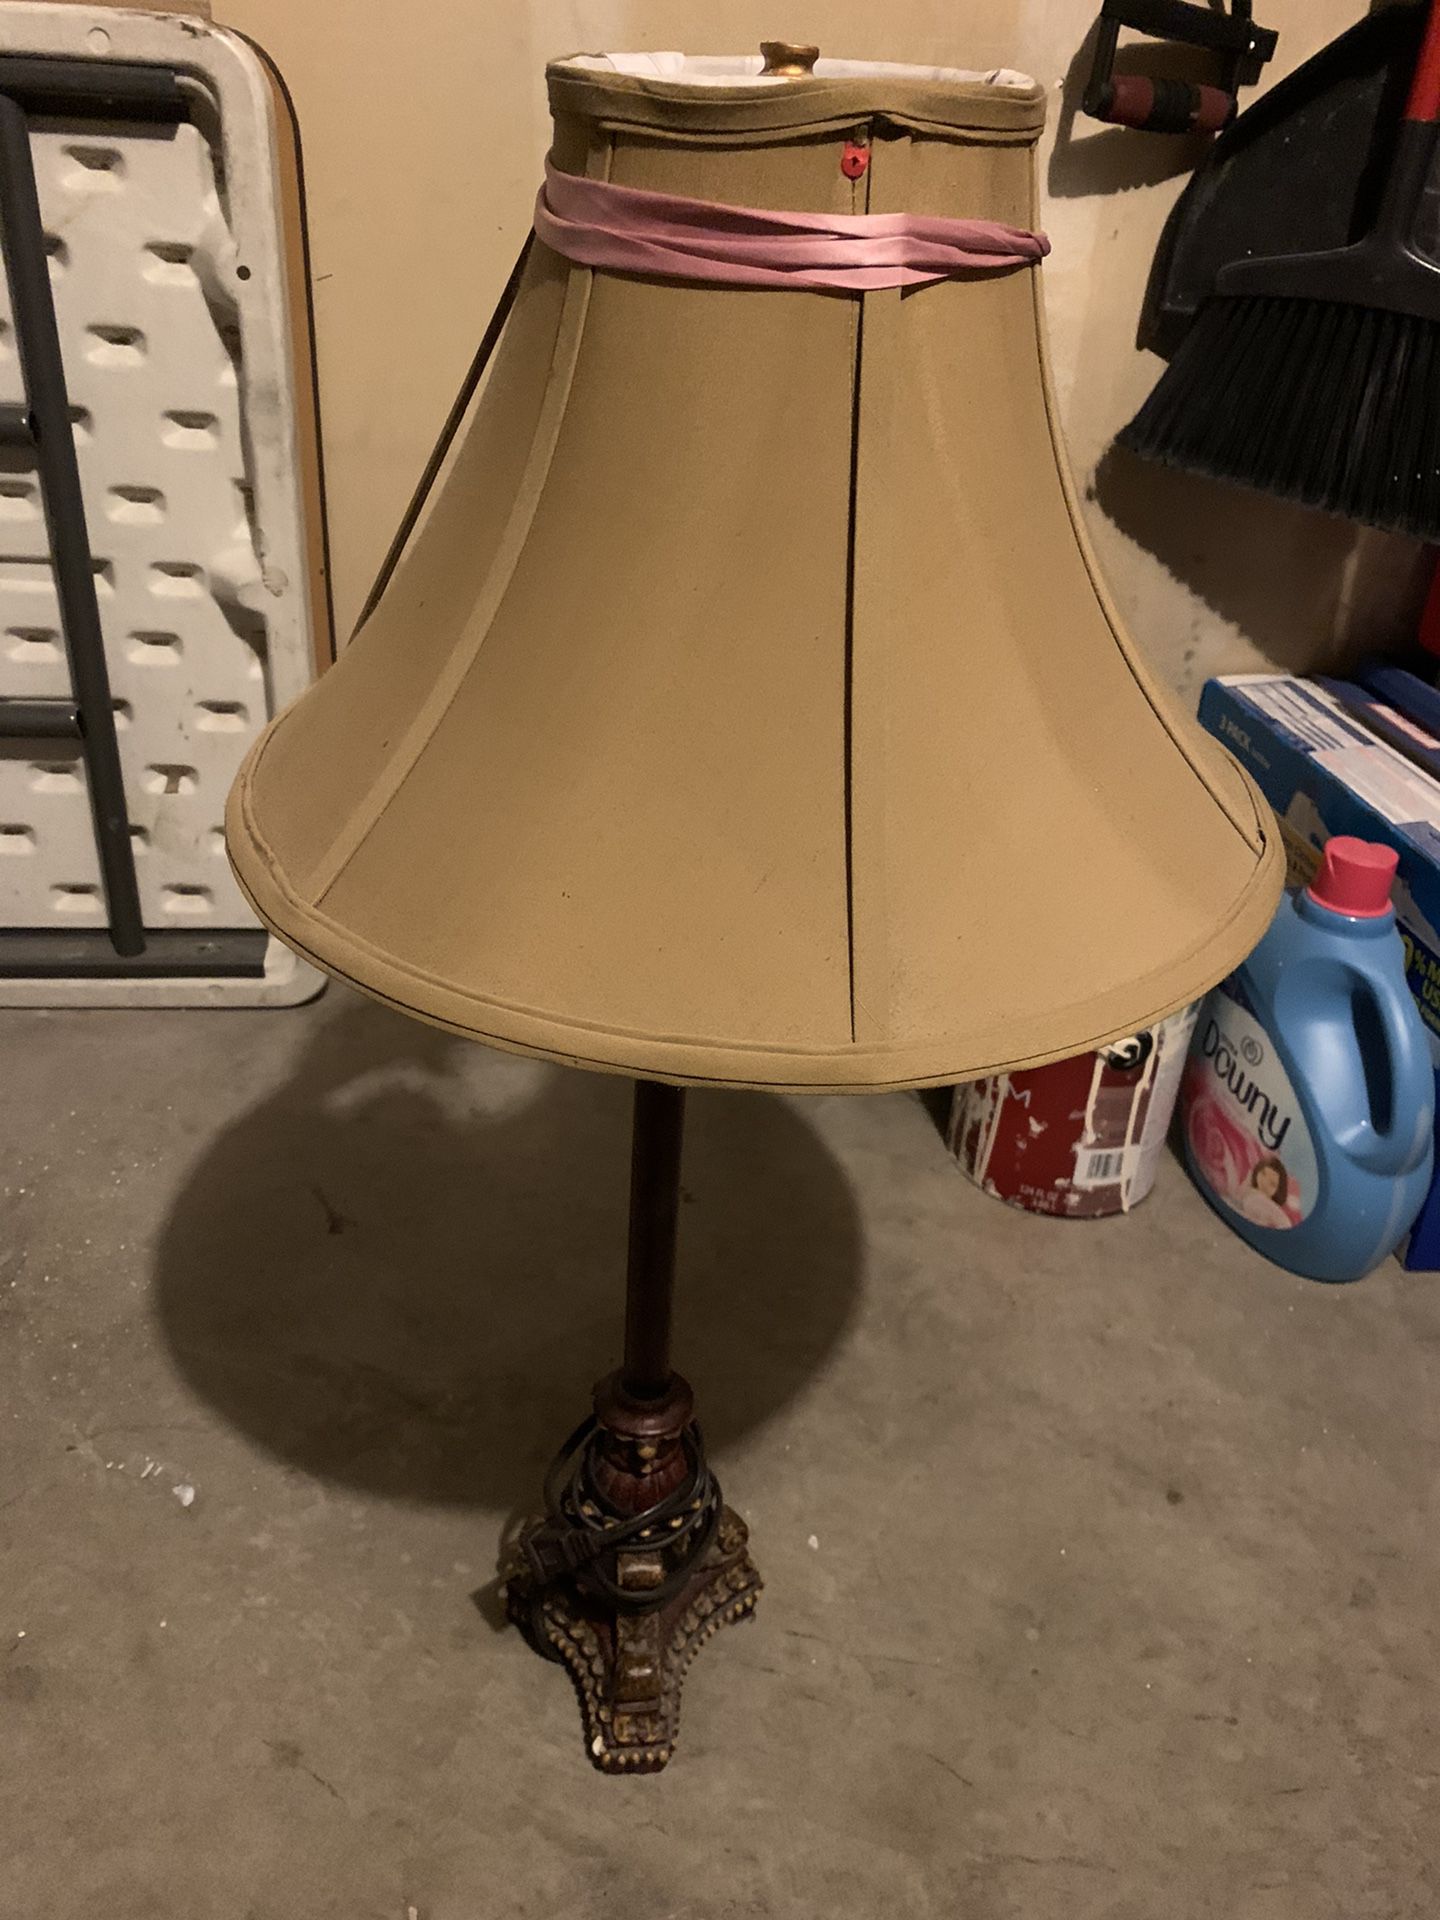 Lamp and also a vanity light and a kitchen light. Starting at $10